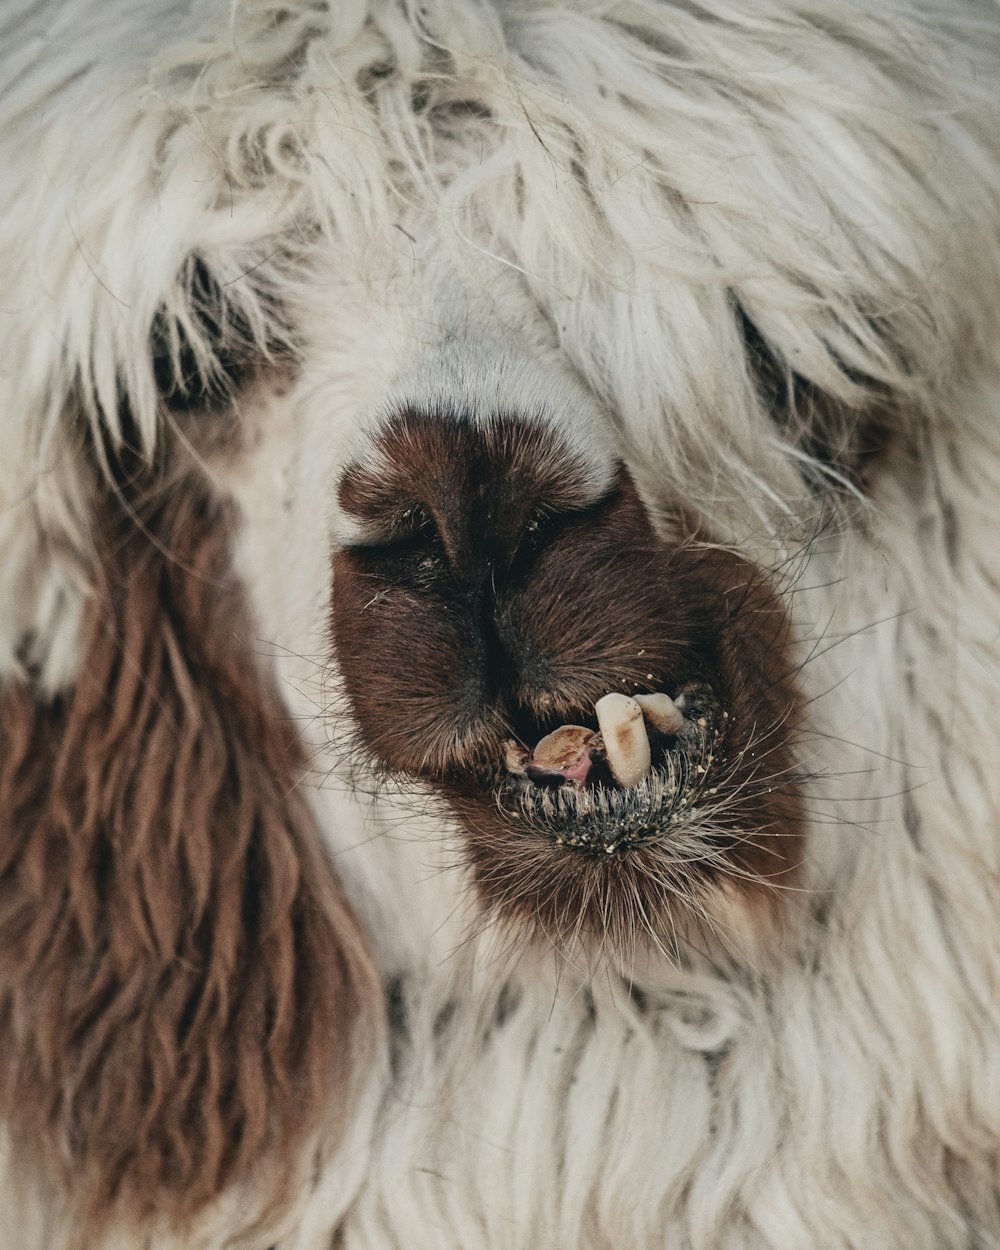 a close up of a furry animal's face